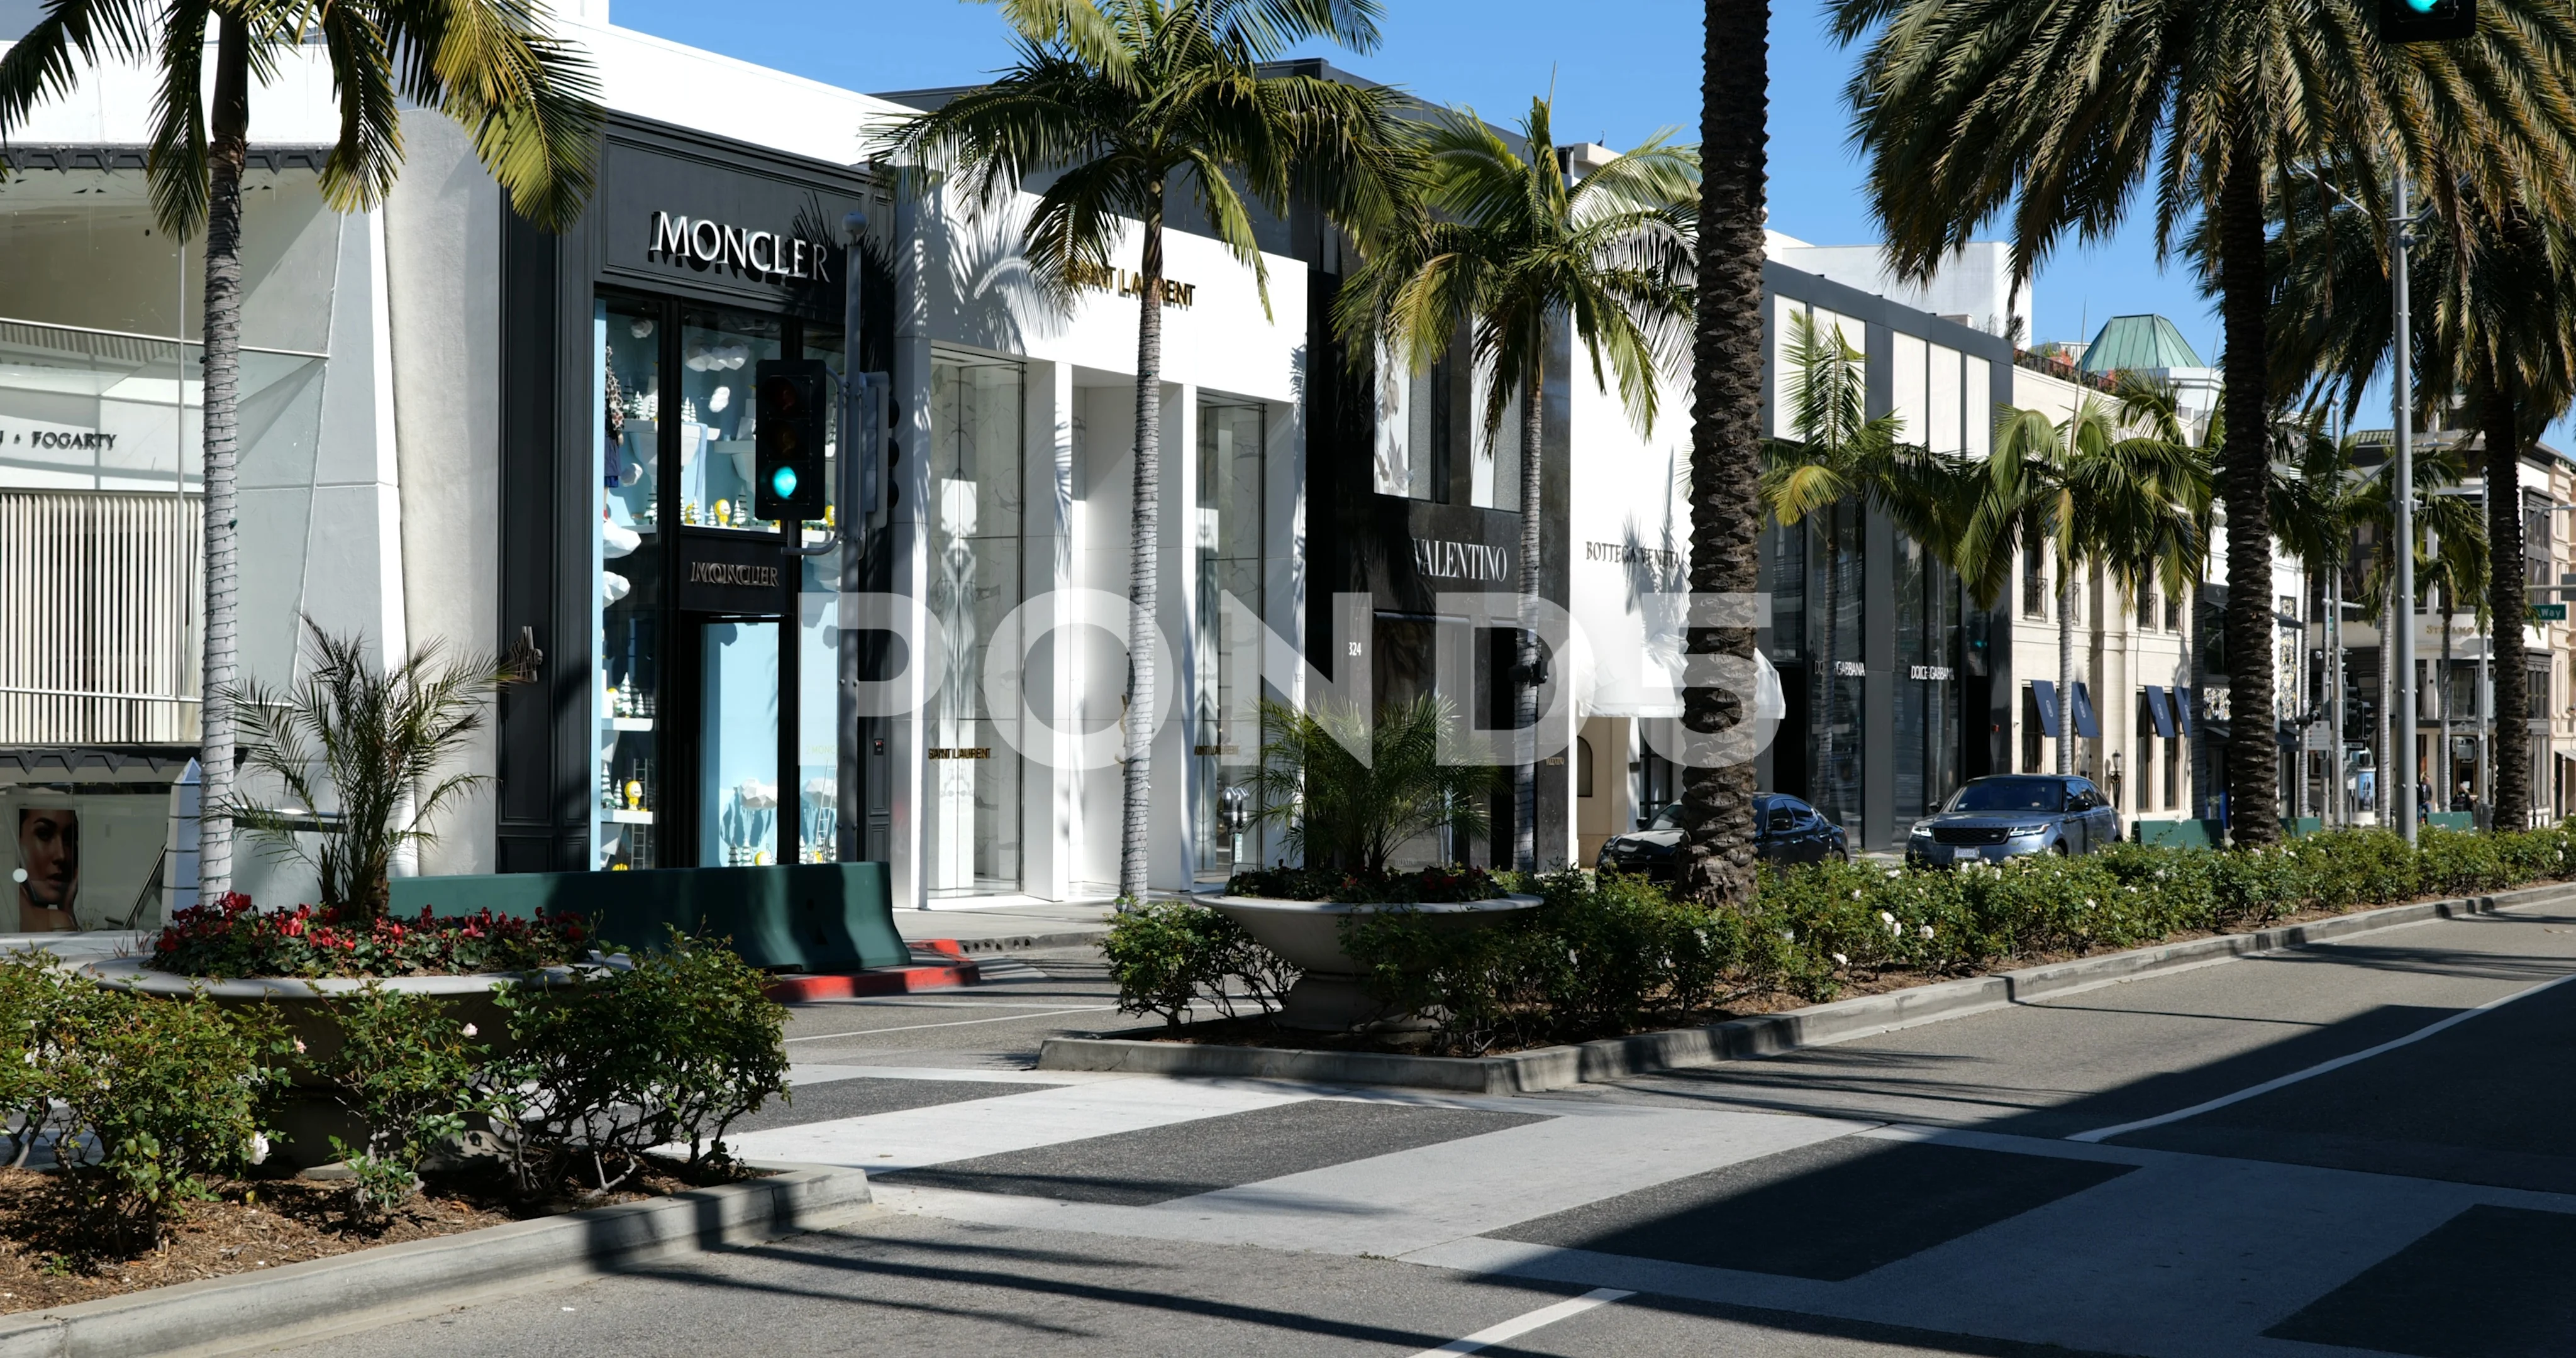 422 Louis Vuitton Store On Rodeo Drive Stock Photos, High-Res